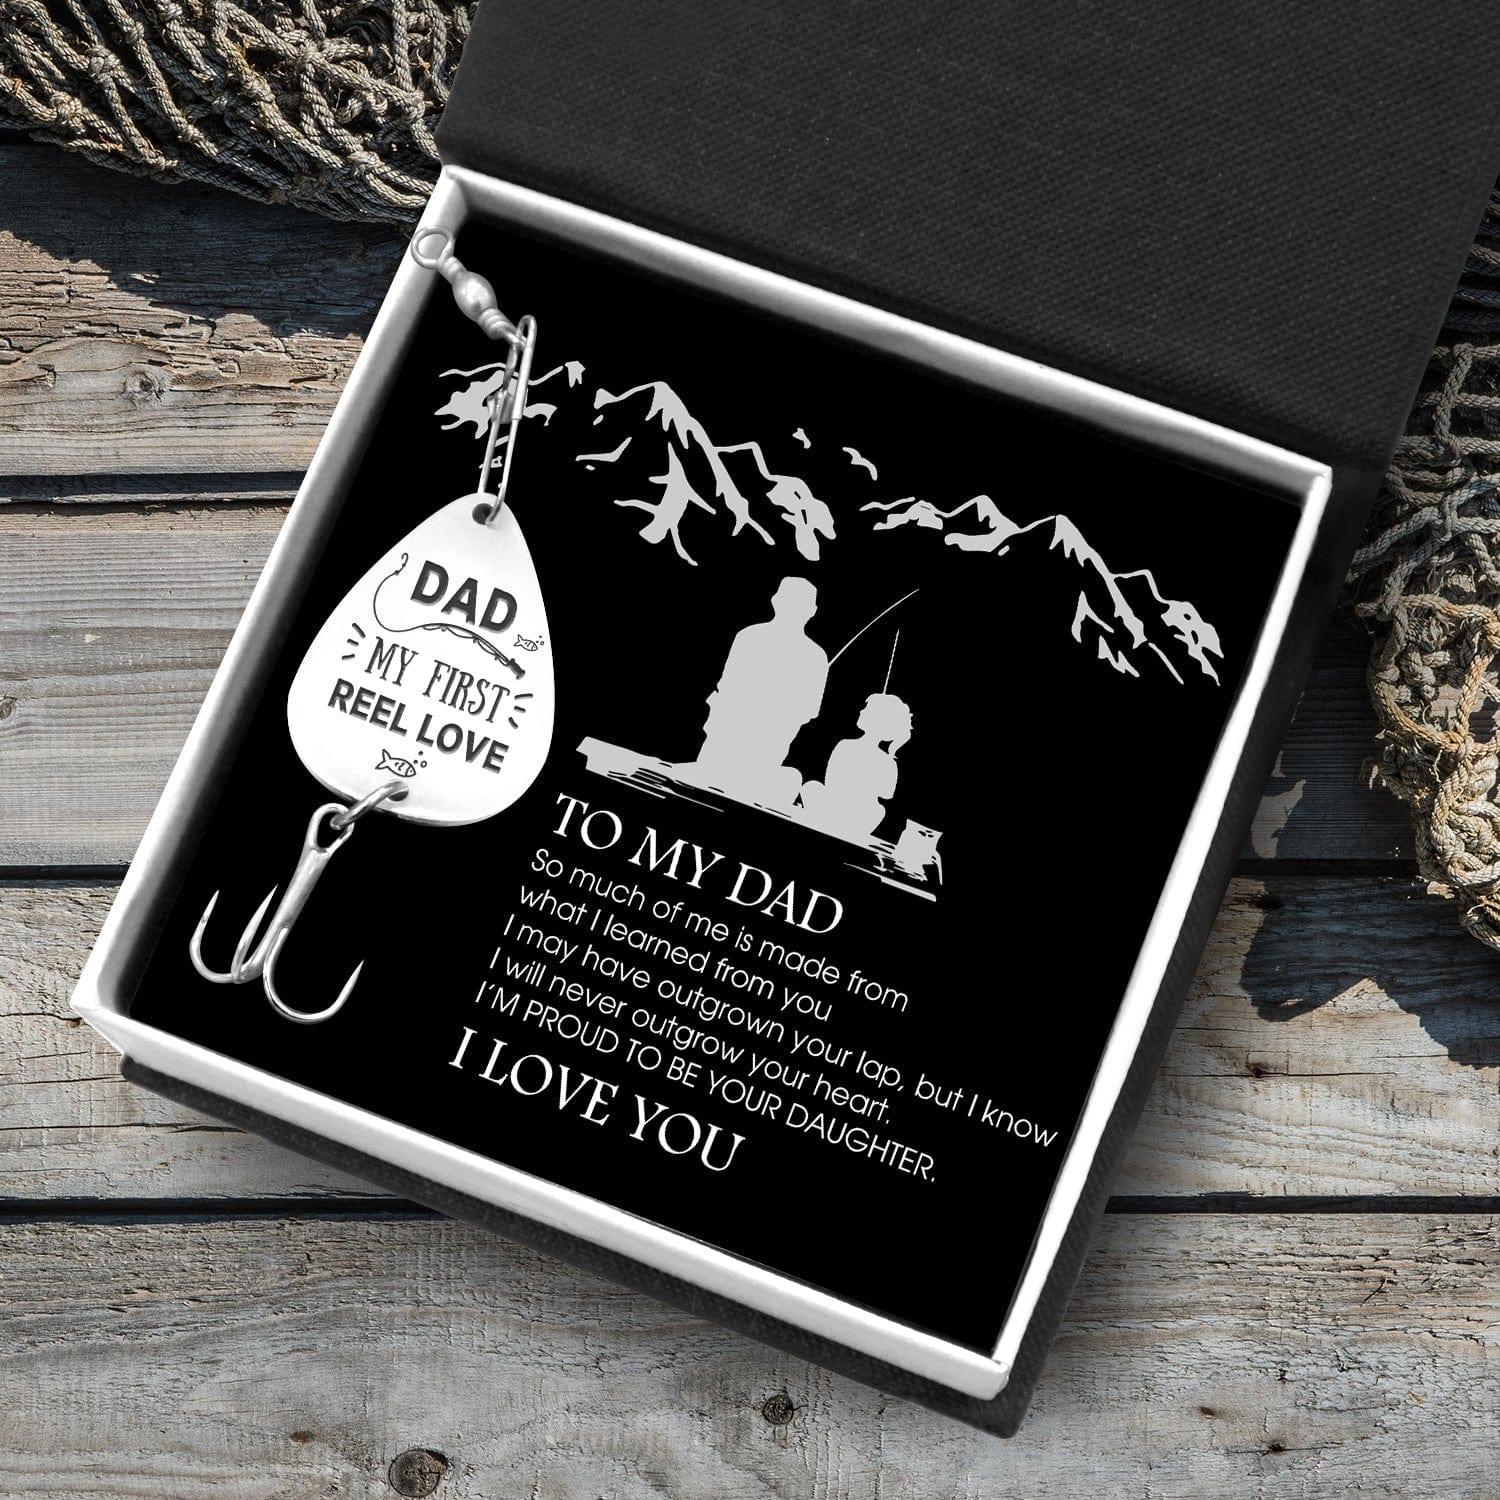 Personalized Engraved Fishing Hook - To Dad - From Daughter - My First Reel Love - What I Learned From You - Augfa18010 - Gifts Holder